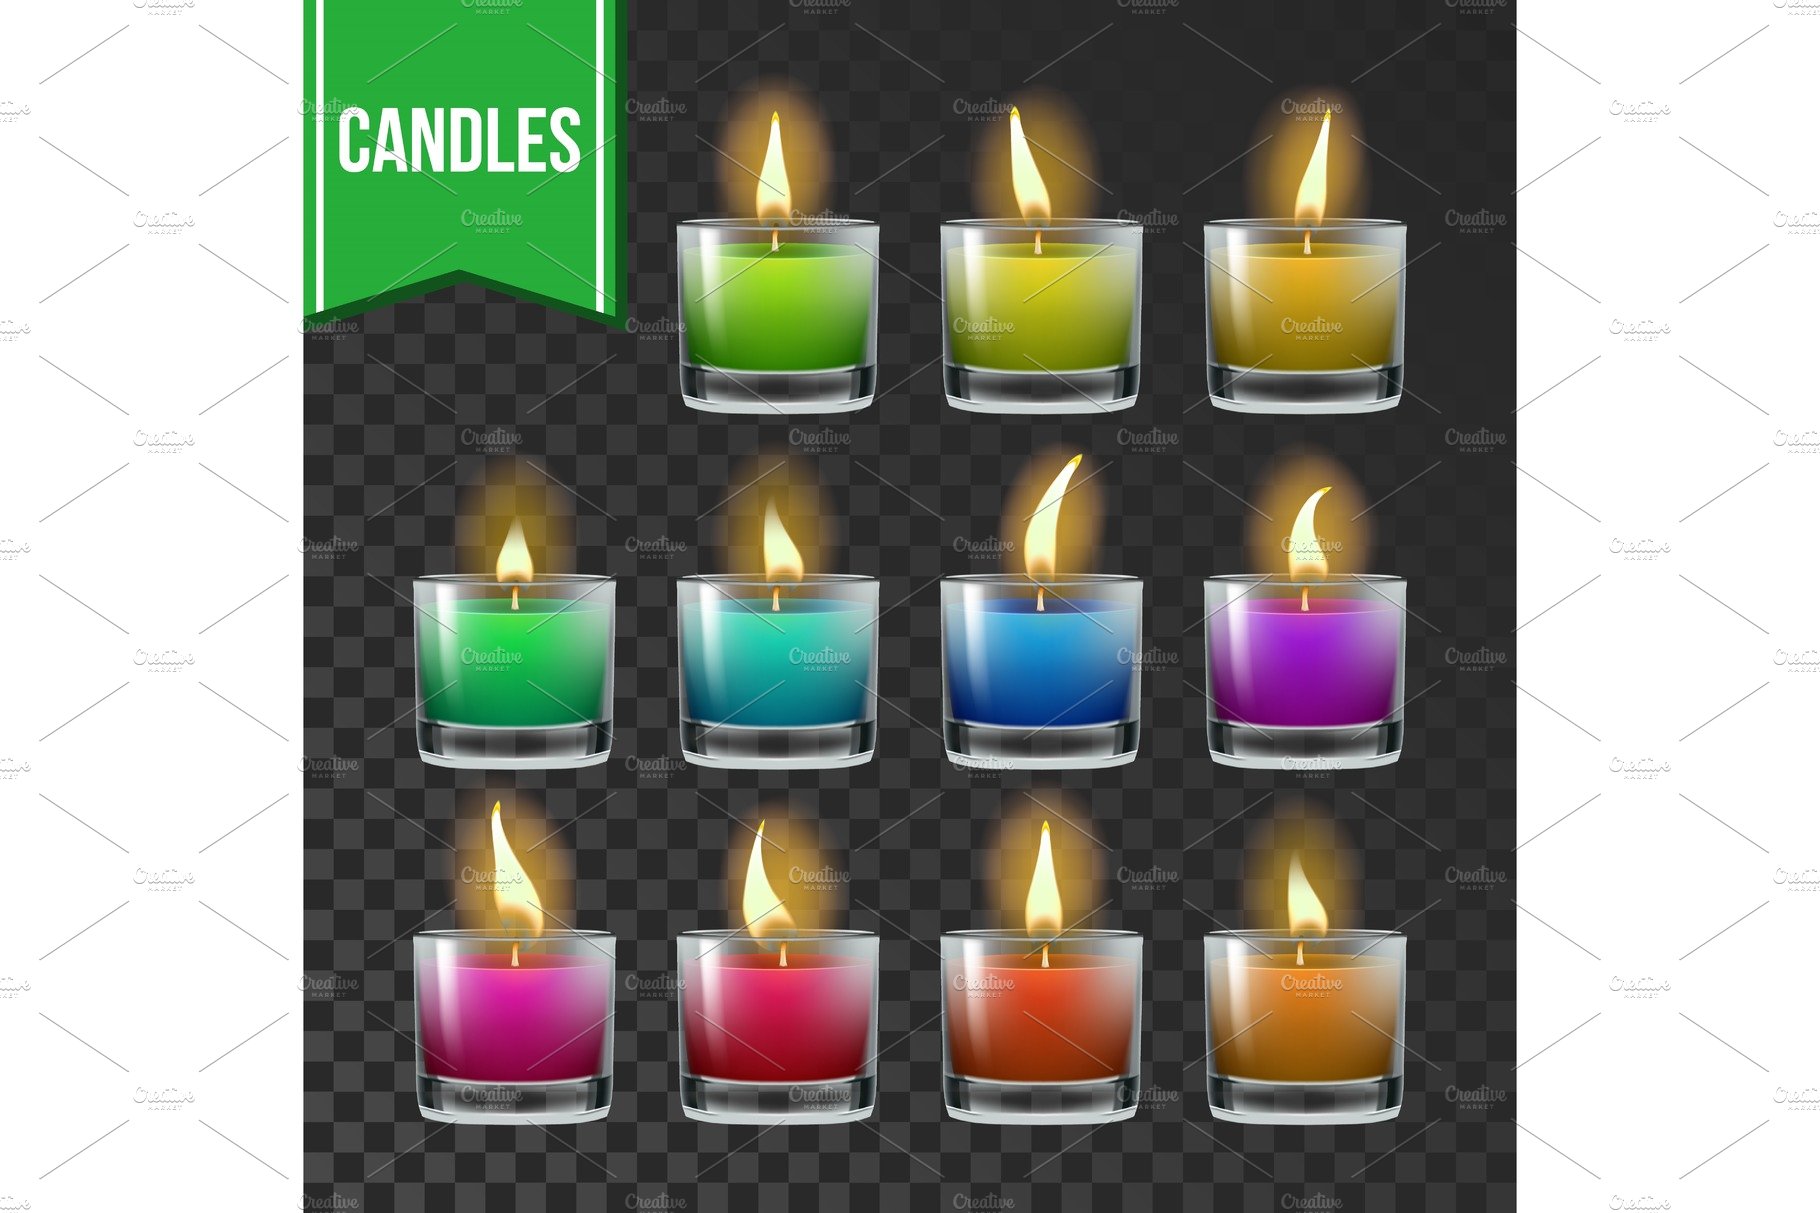 Candles Set Vector. Glass Jar cover image.